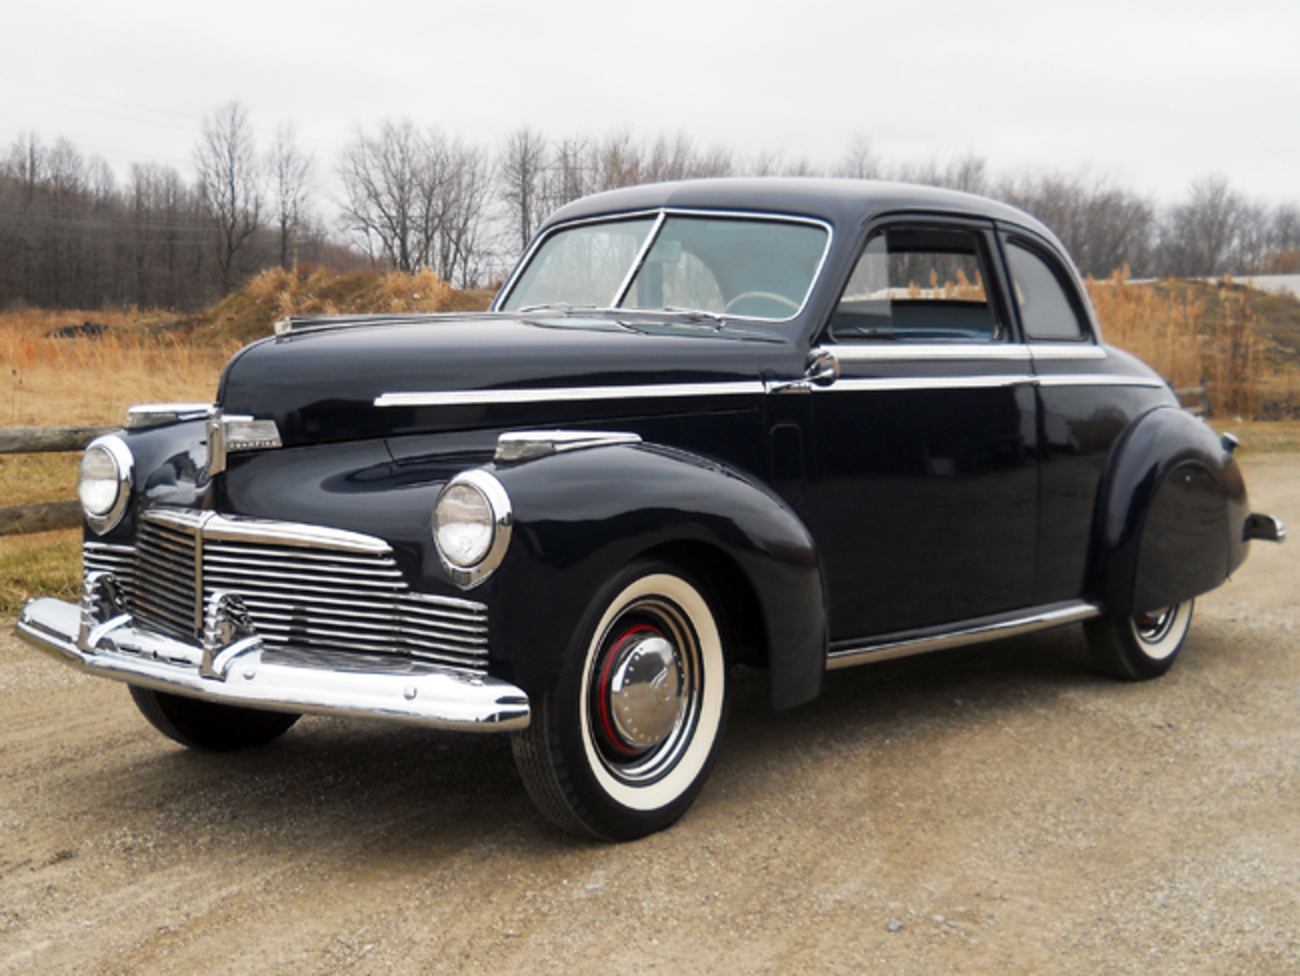 FOR SALE: 1942 Studebaker Champion Coupe